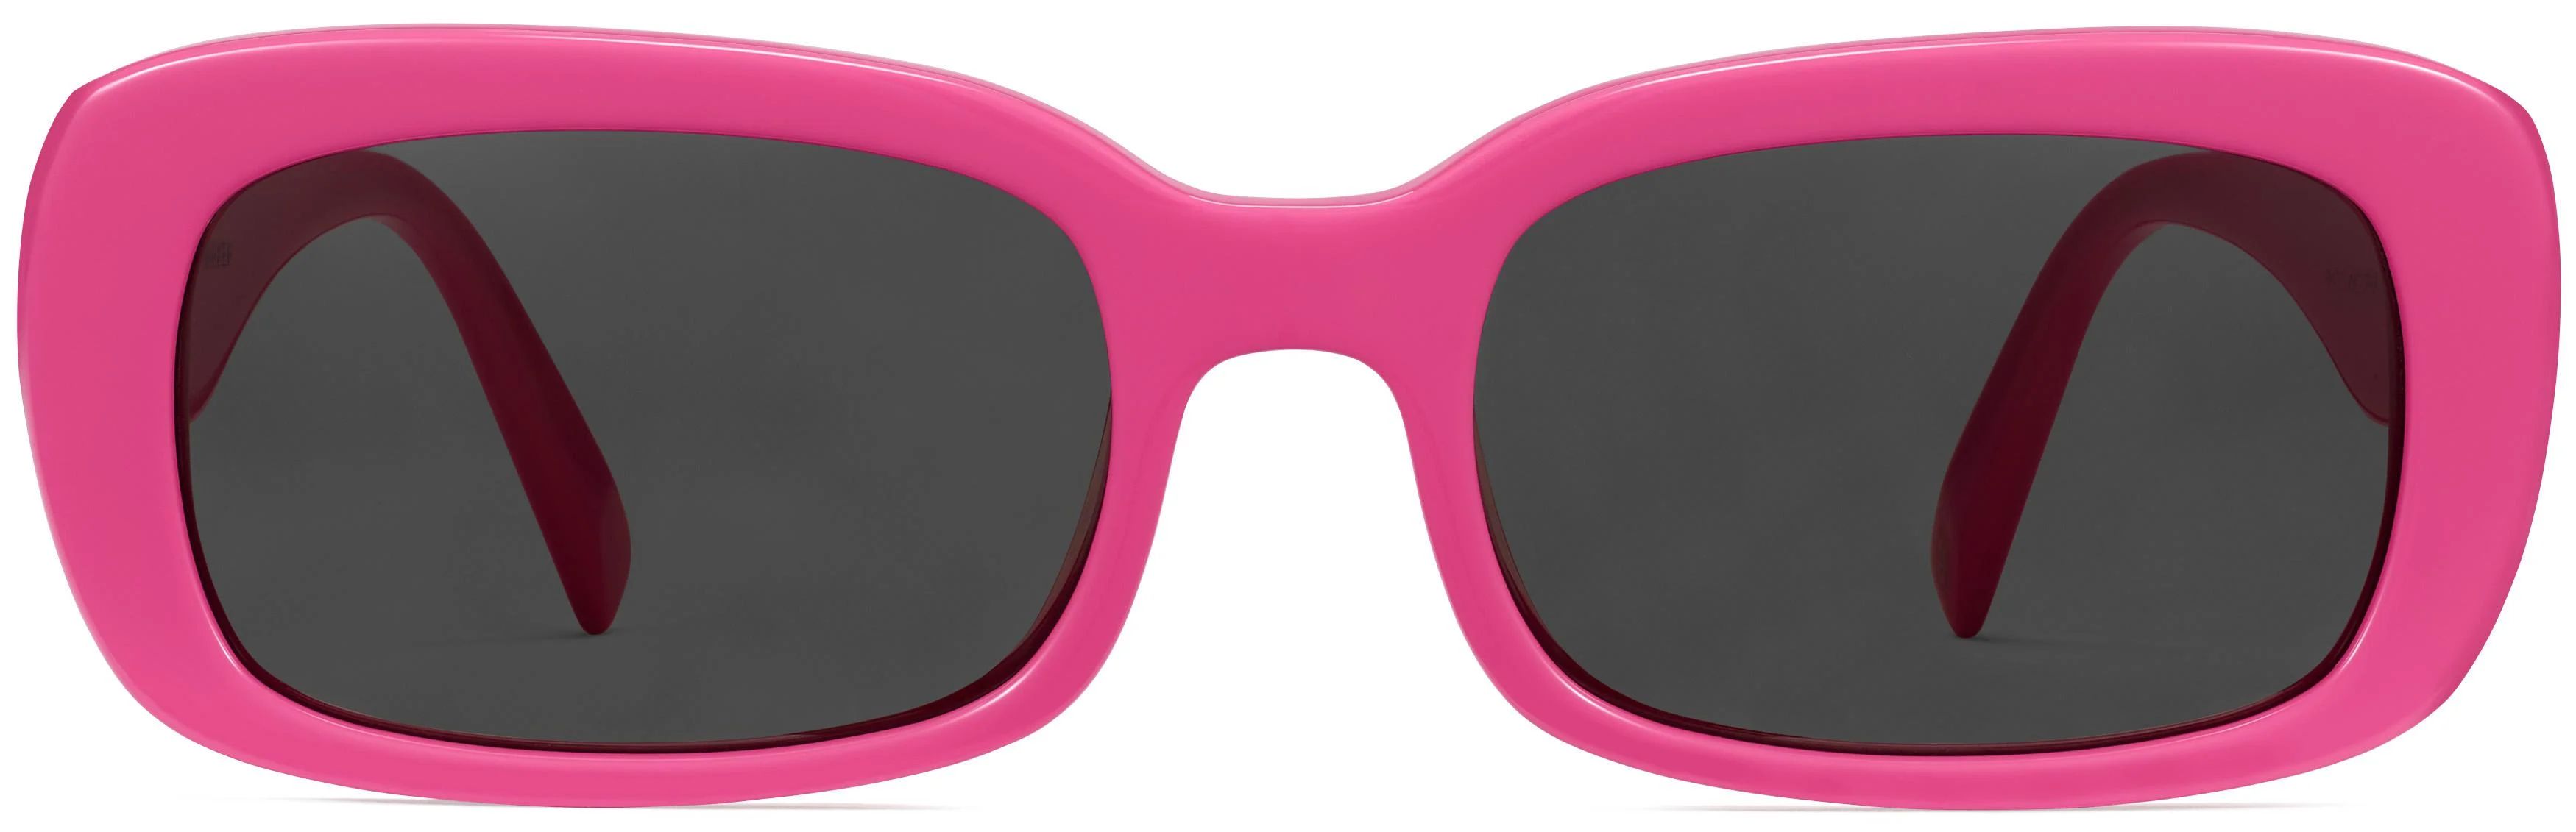 NST2-002 Sunglasses in Pink Nebula | Warby Parker | Warby Parker (US)